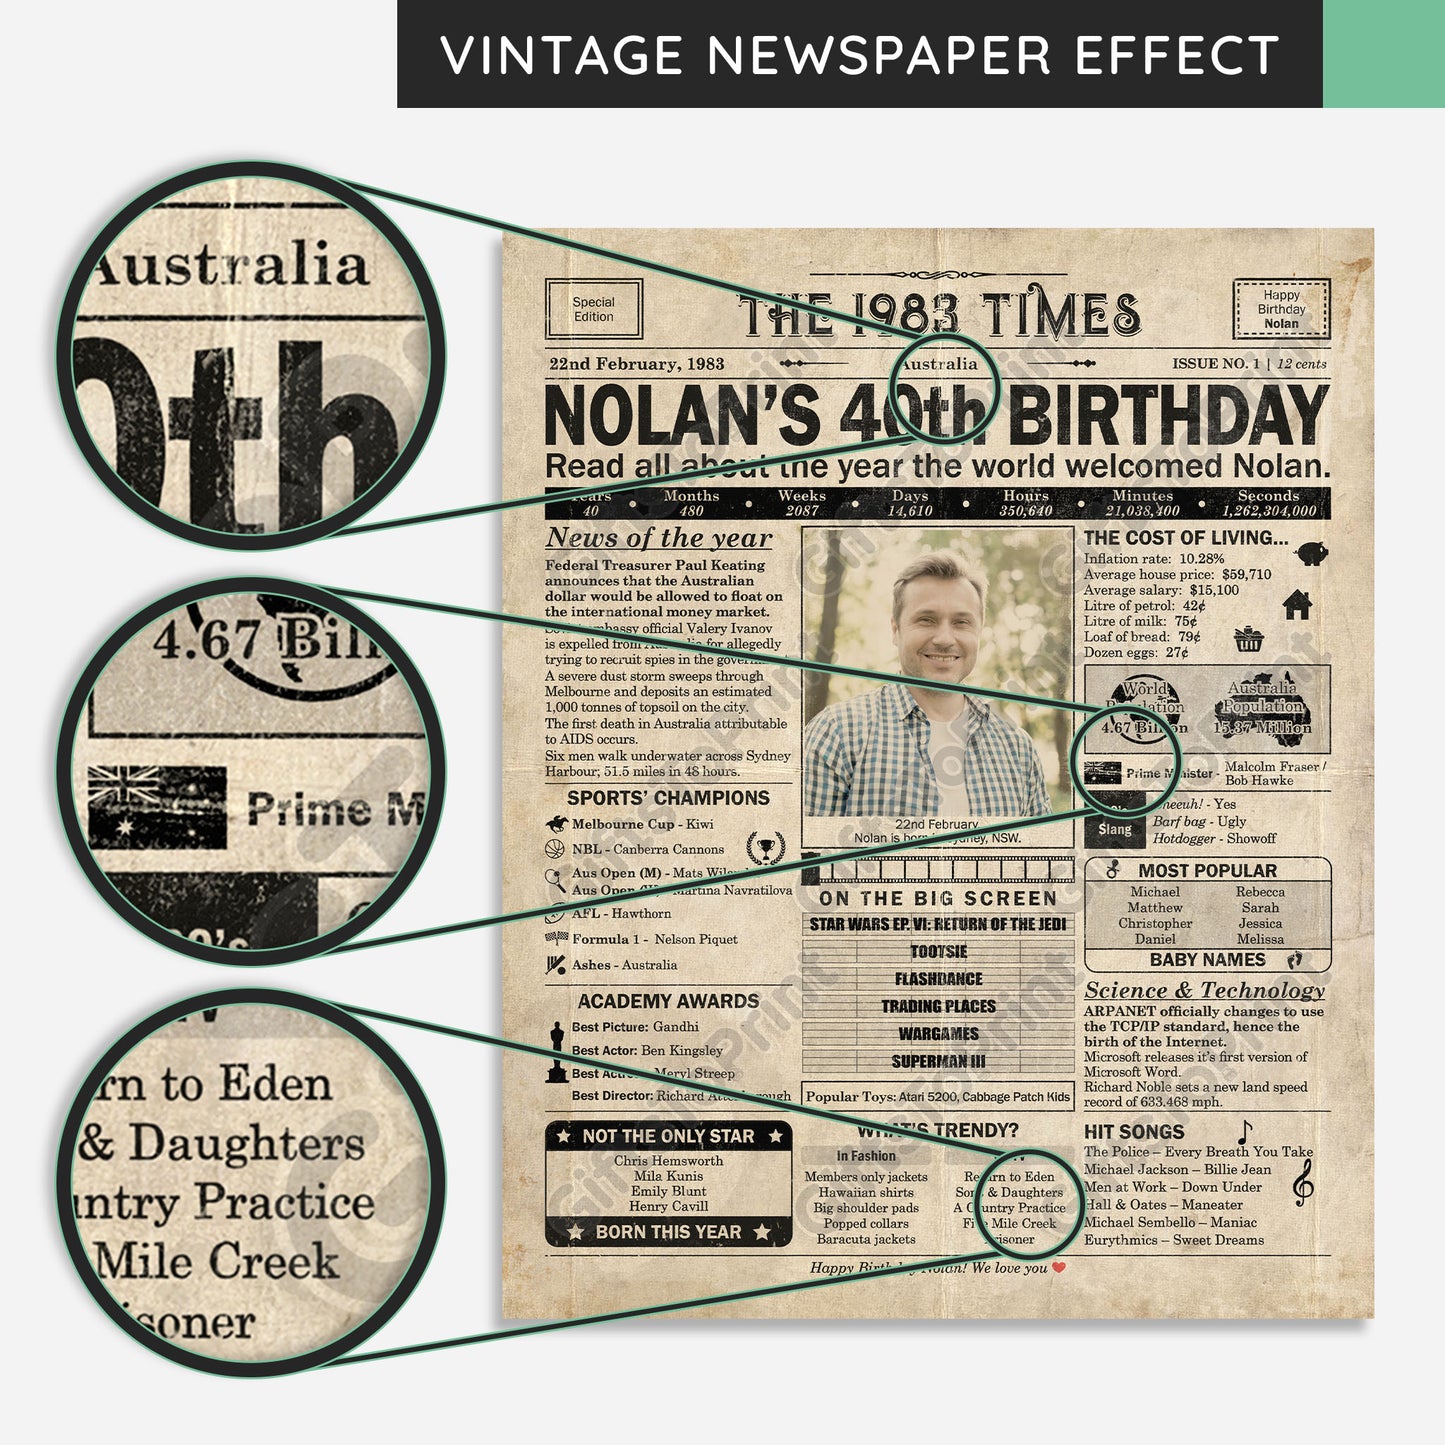 Personalised 40th Birthday Gift: A Printable AUSTRALIAN Birthday Poster of 1983